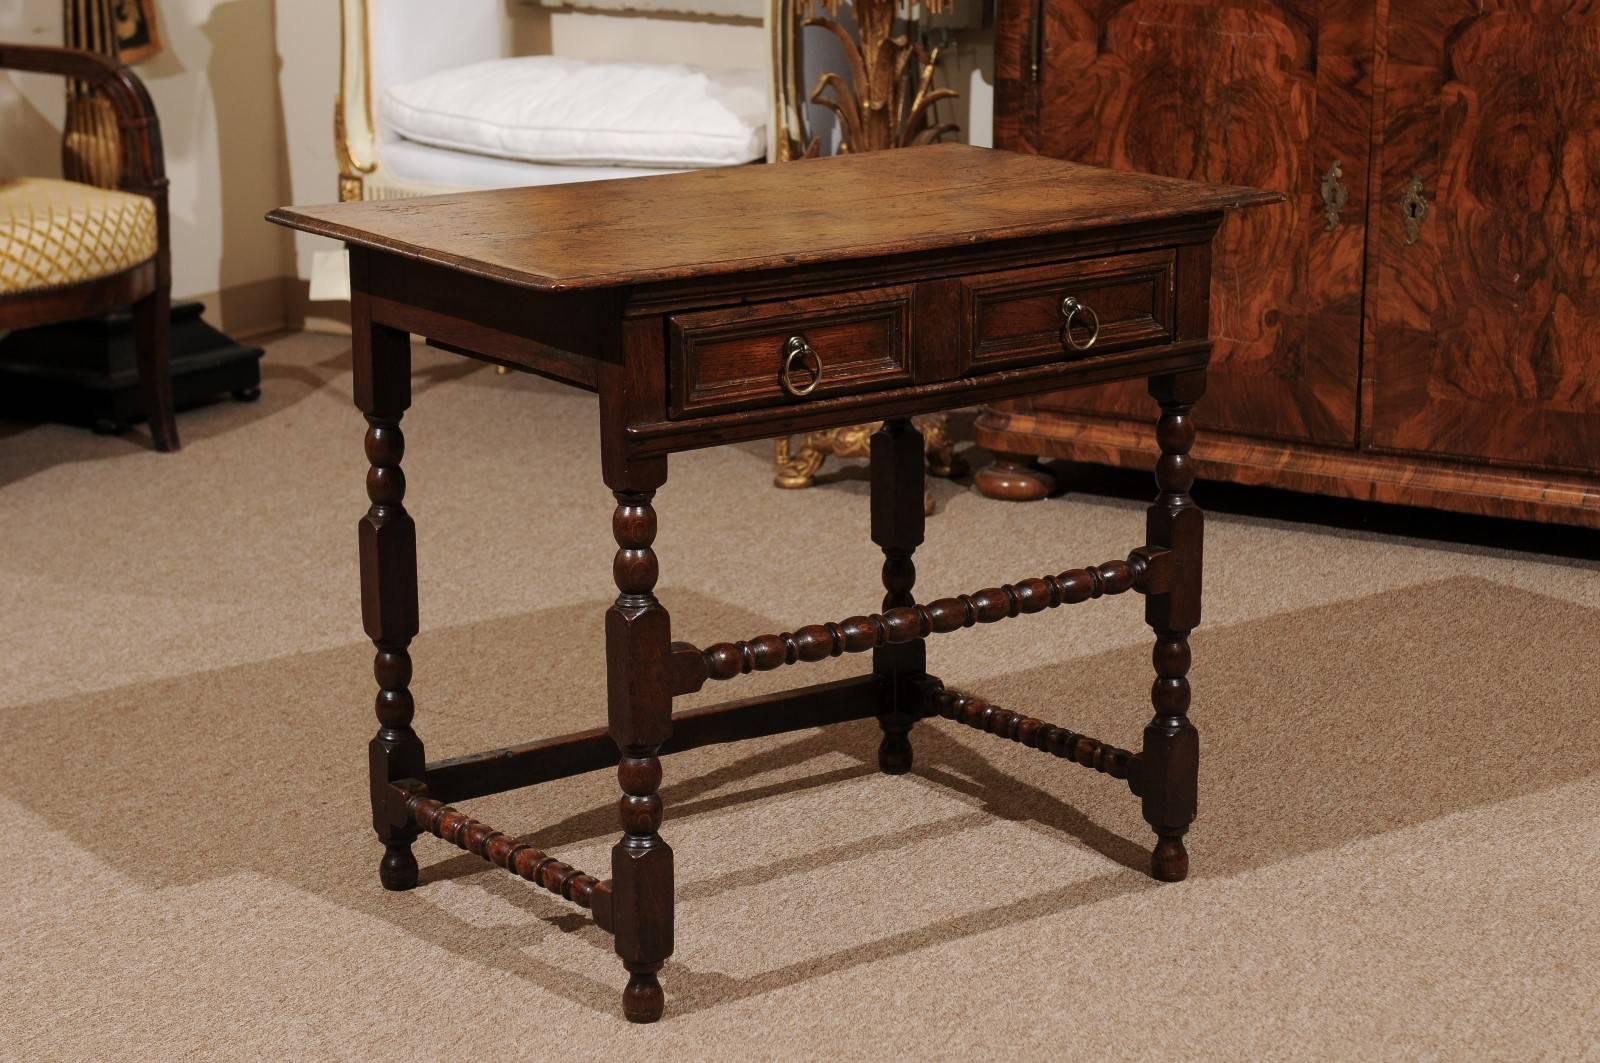 Side table in oak with one-drawer and bobbin turned legs and stretcher, England, 19th century.